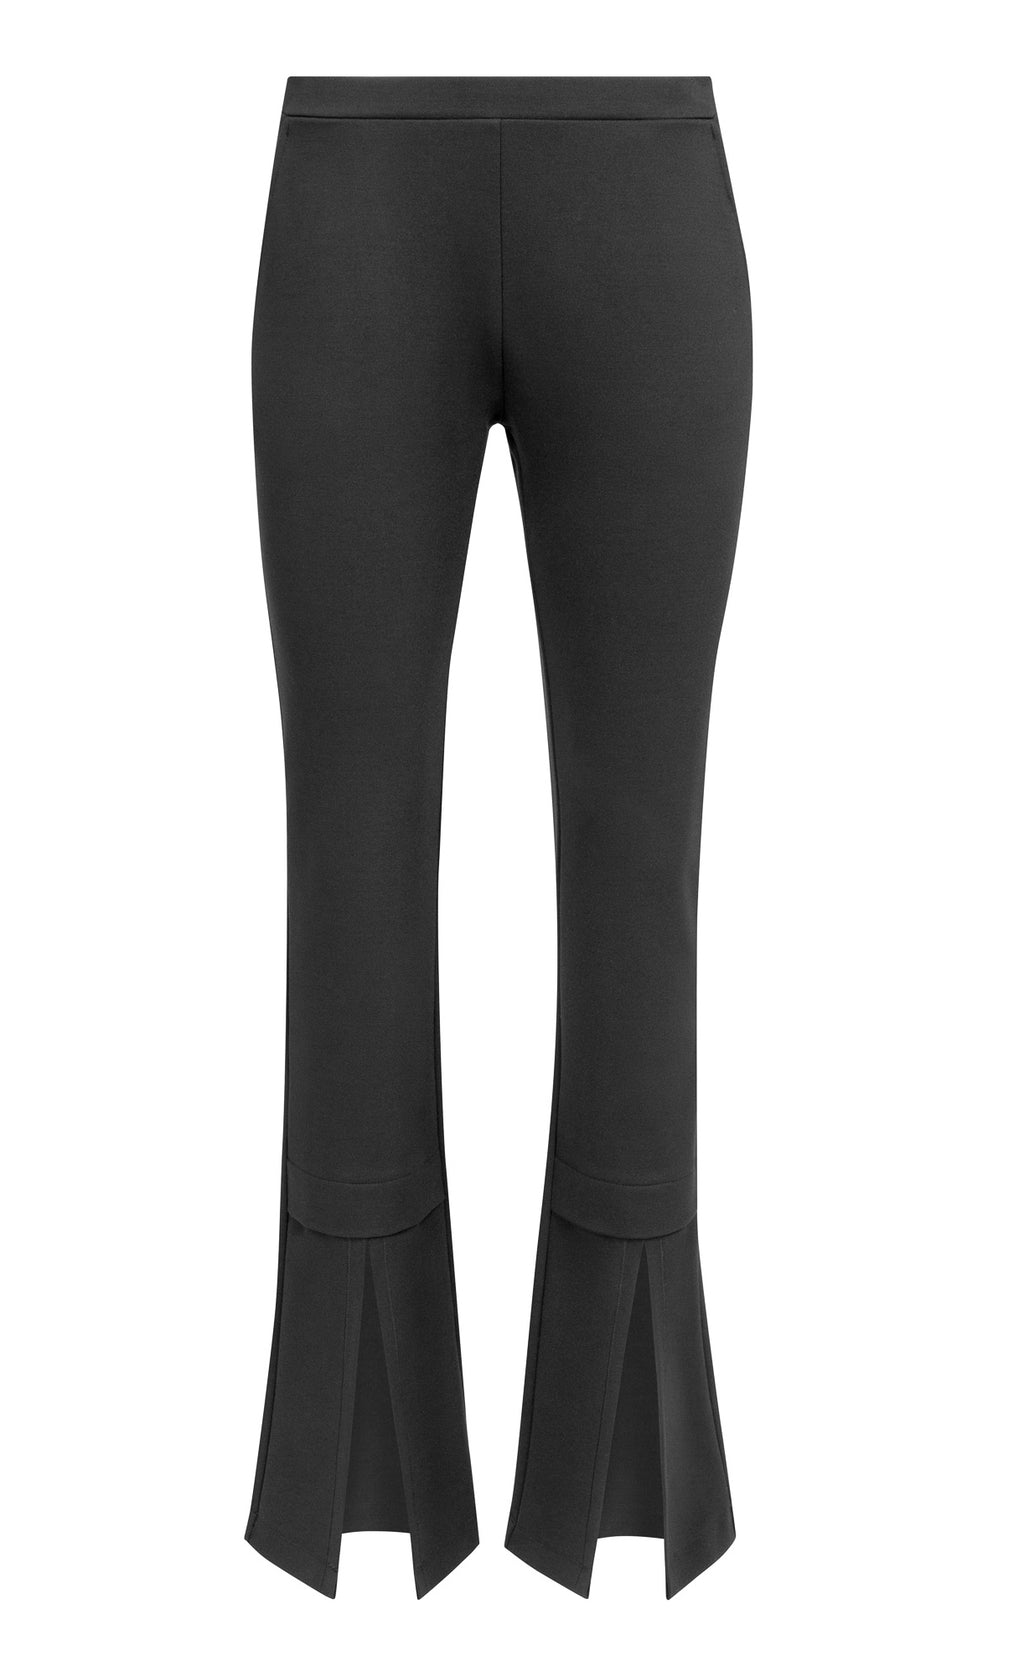 Front view of the Xenia Design Tile Pant in black.